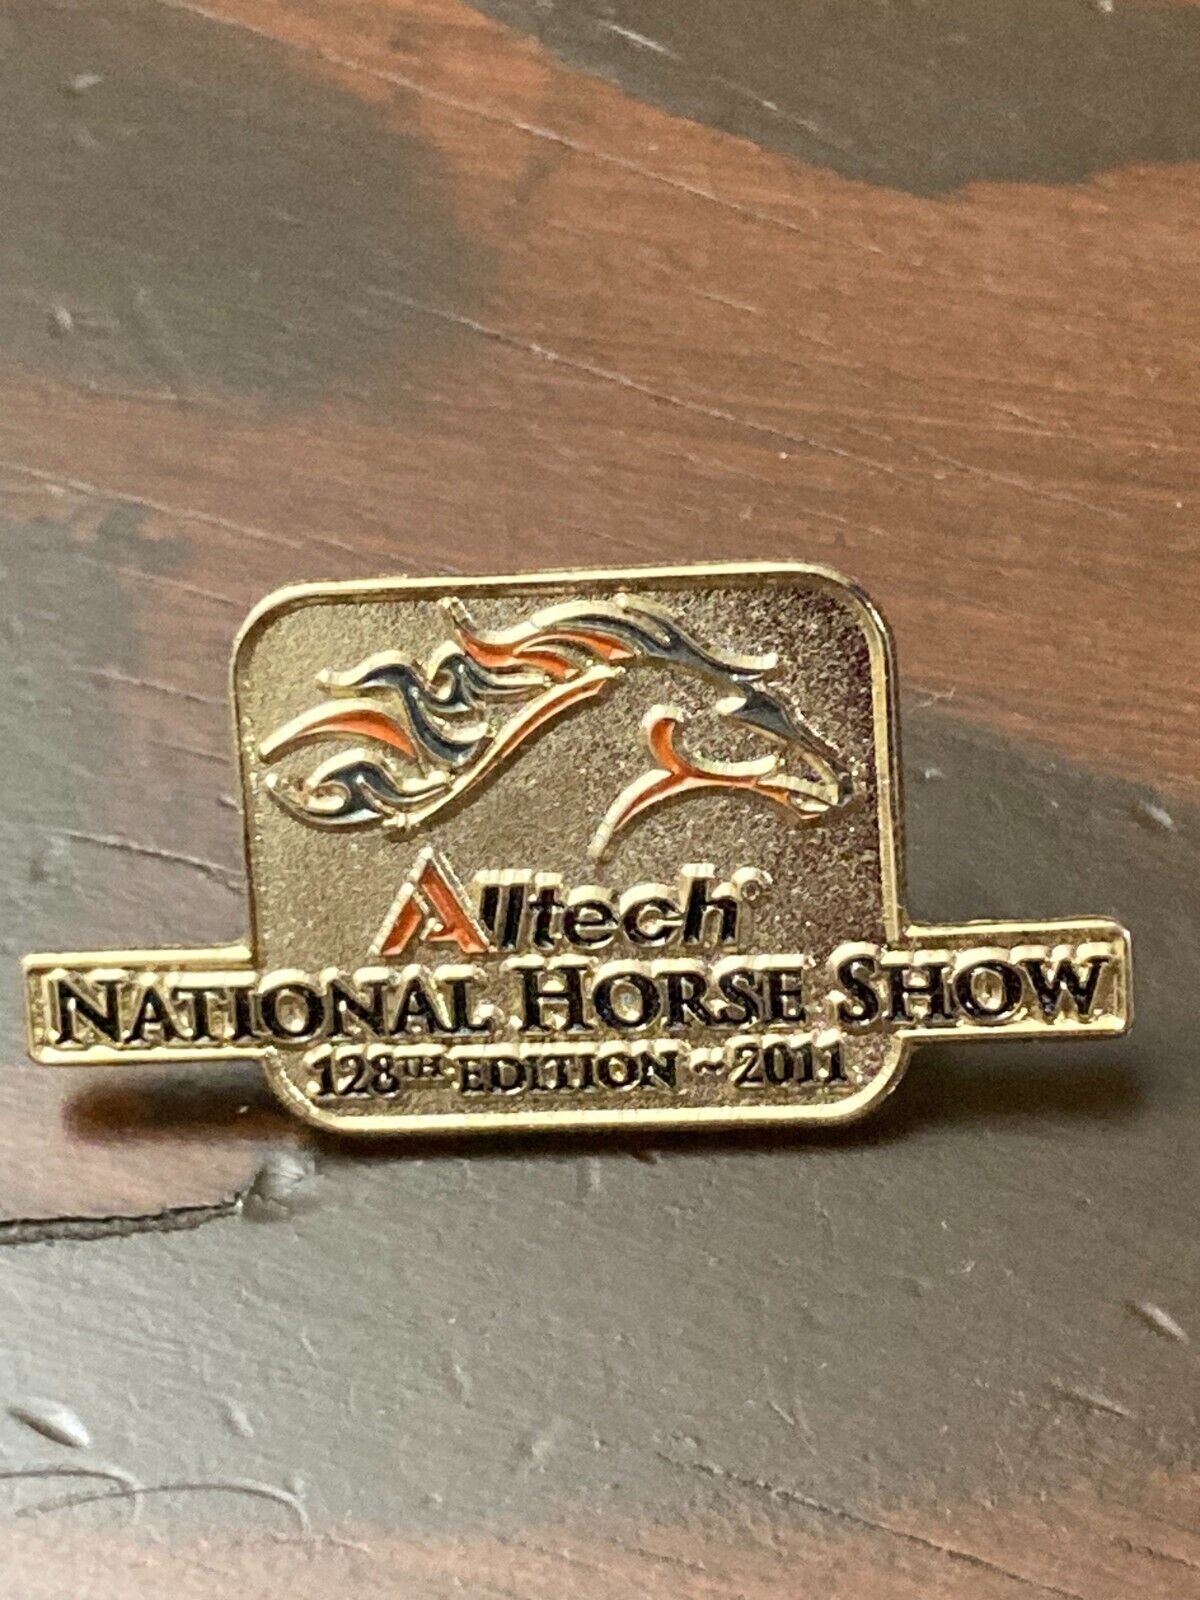 2011 Alltech National Horse Show 128th Edition Animal Collector Lapel Pin